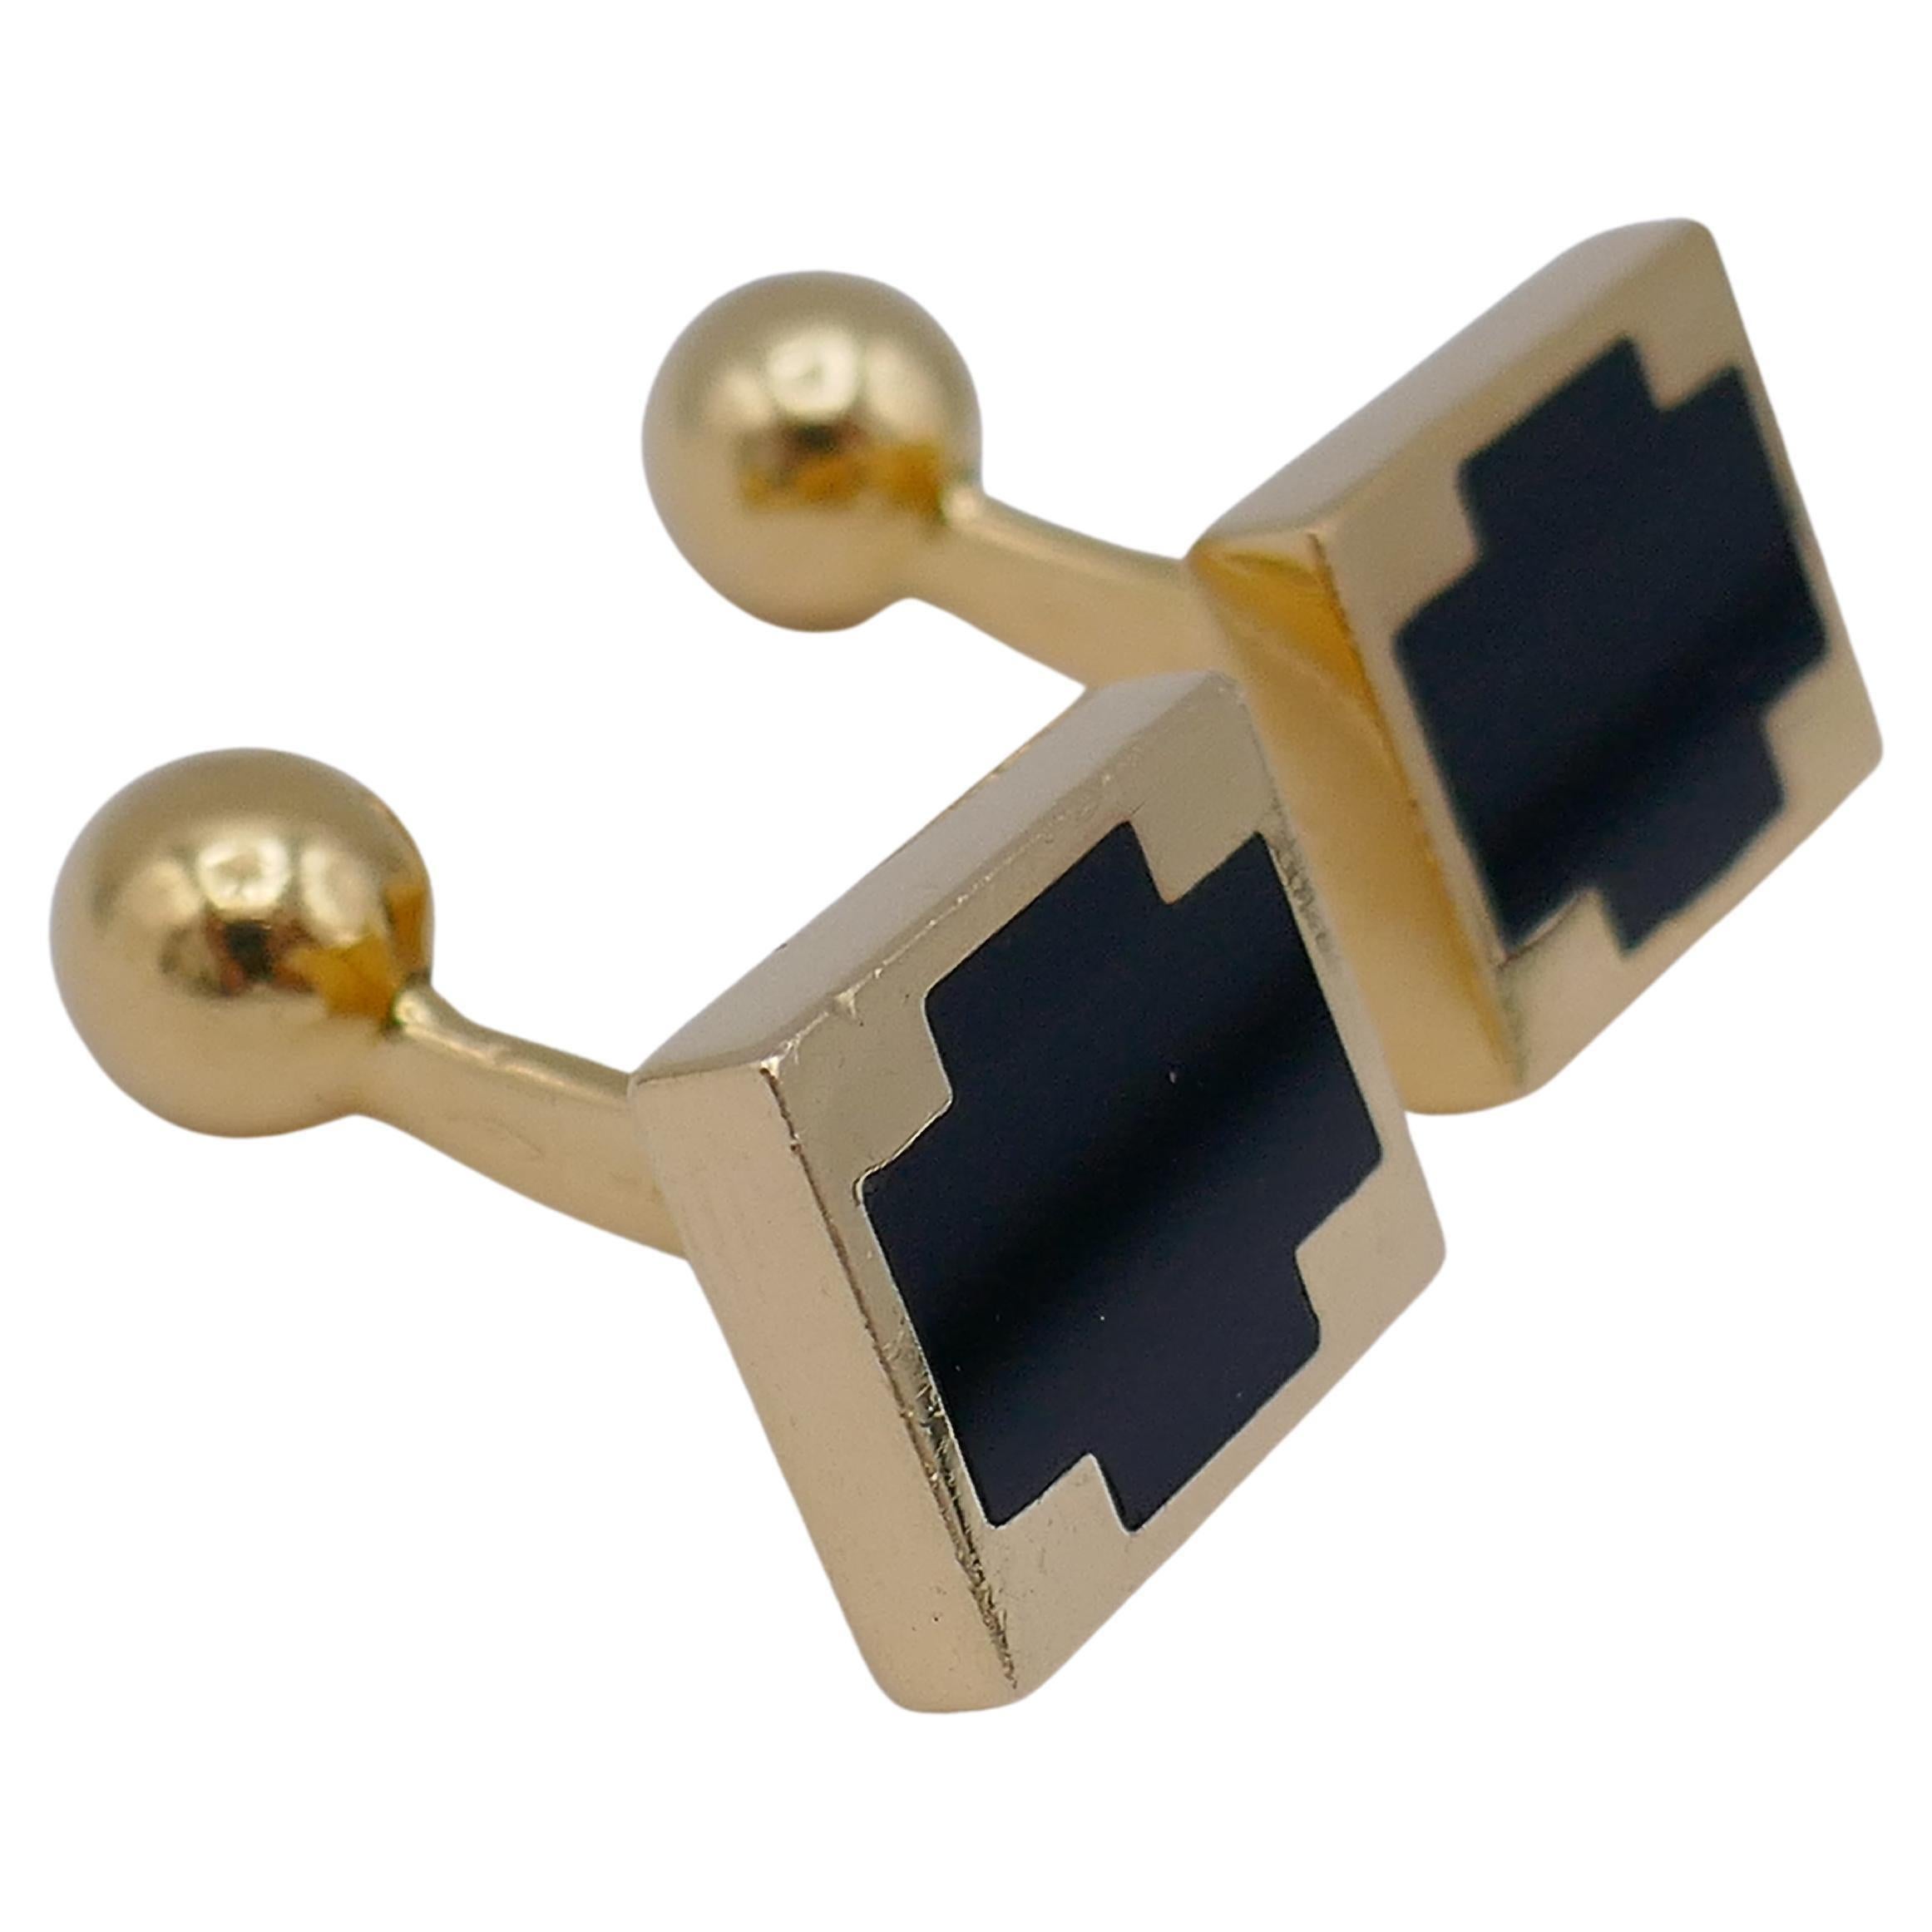 A great pair of vintage Gucci cufflinks, made of 18k gold, featuring onyx.
The onyx inlay designed as a squar'ish cross. The high-polished gold background makes the onyx pop.
These minimalist yet stylish cufflinks elevates your look and adds a touch